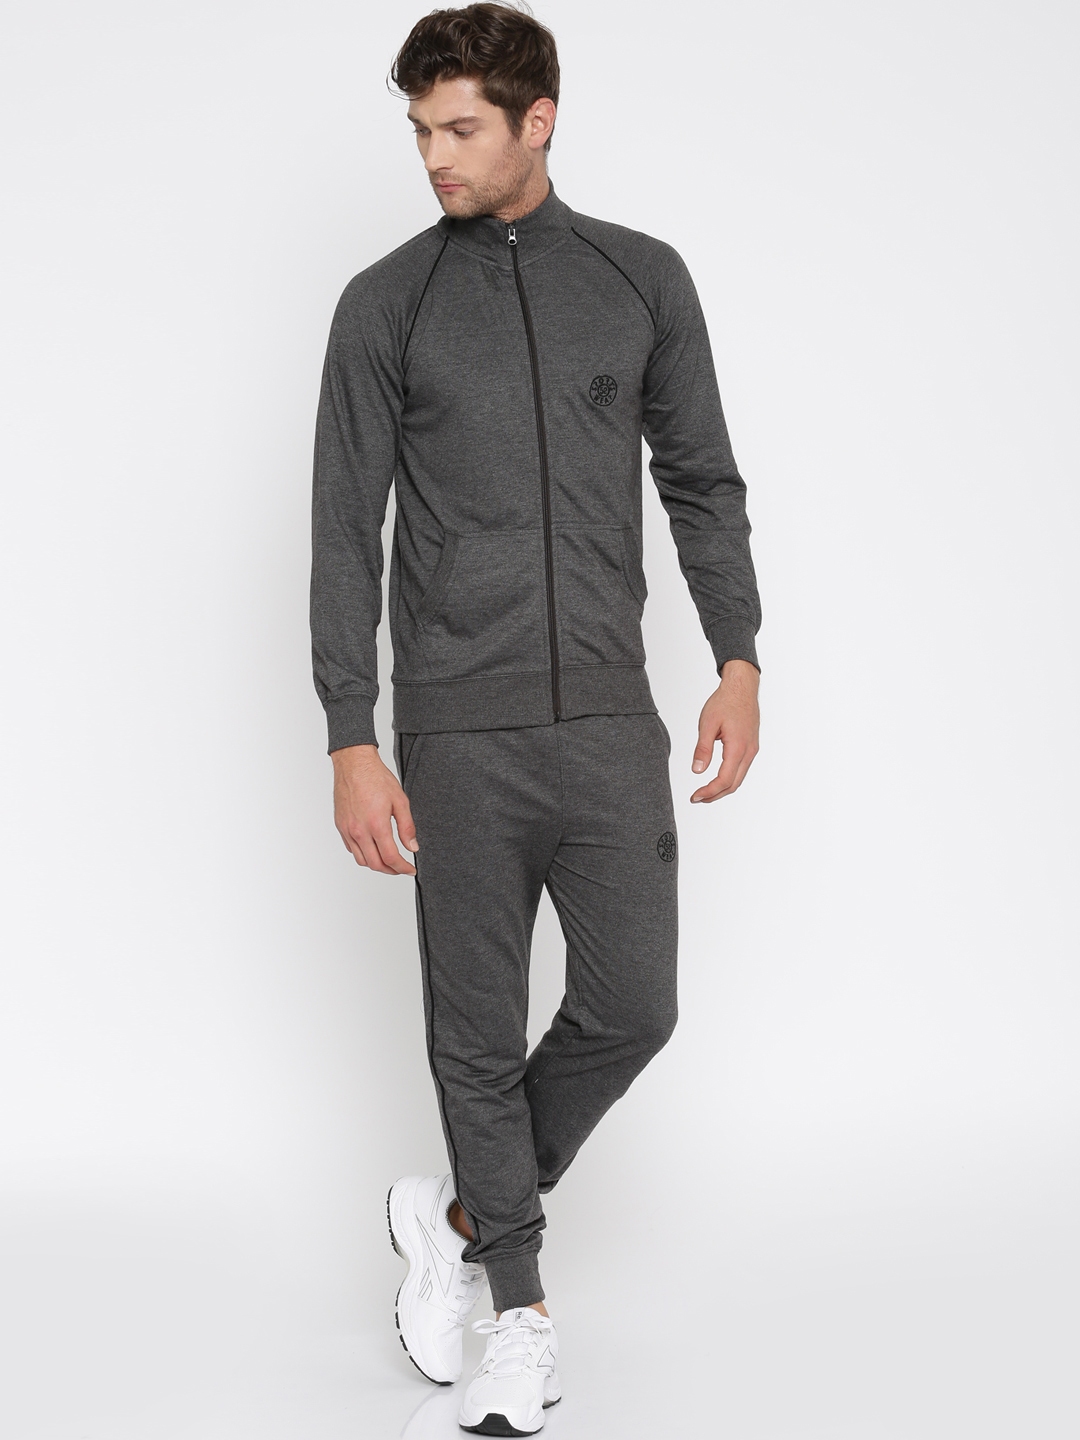 Buy Sports52 Wear Charcoal Grey Tracksuit - Tracksuits for Men 1812114 ...